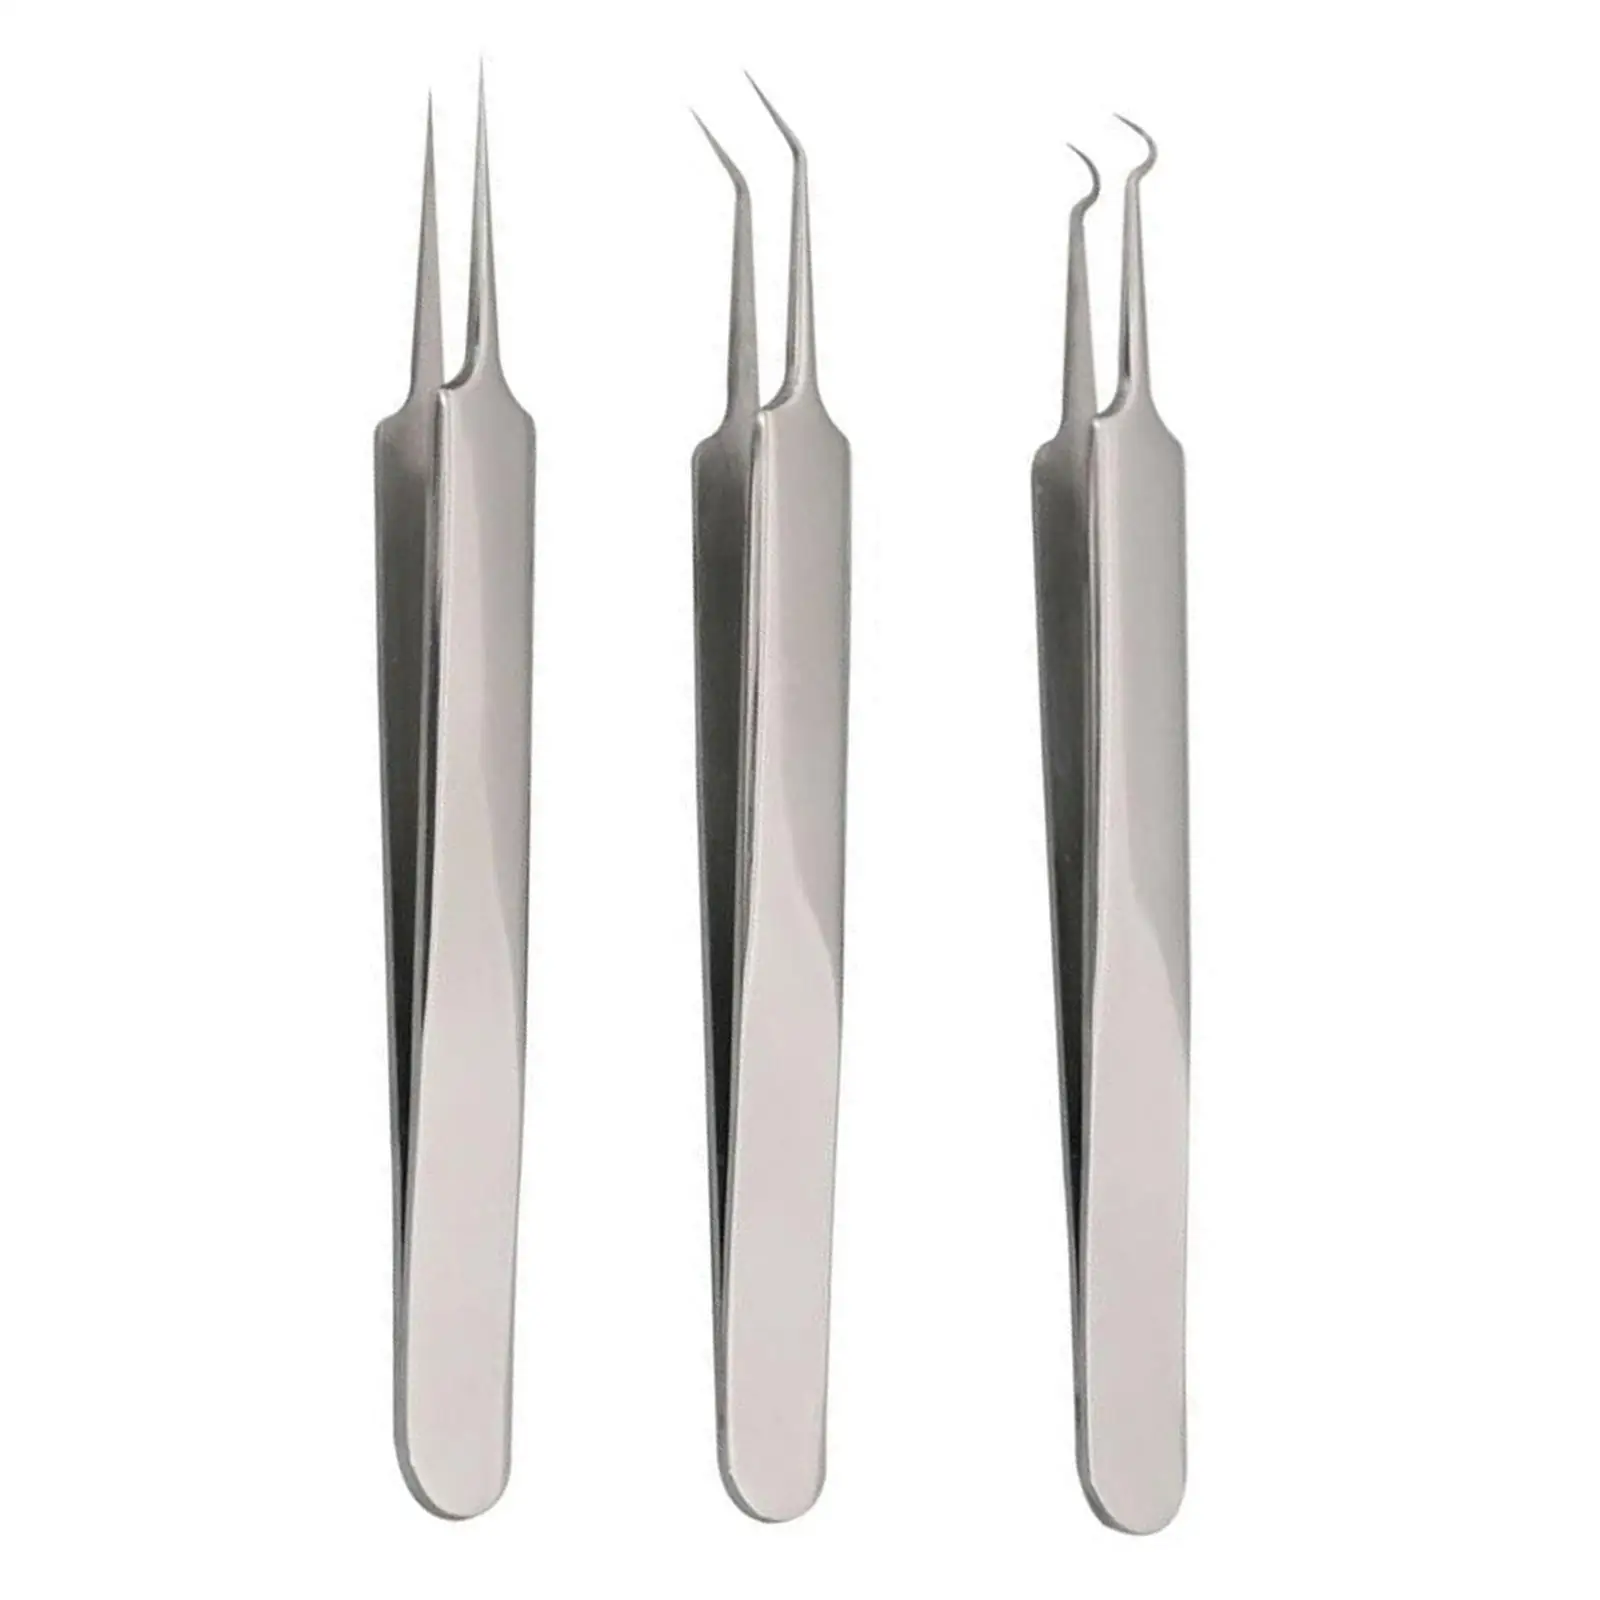  Extractor kit, Remover  Tool Professional Stainless Steel  Extractor Instrument Tool Set for CuFacial